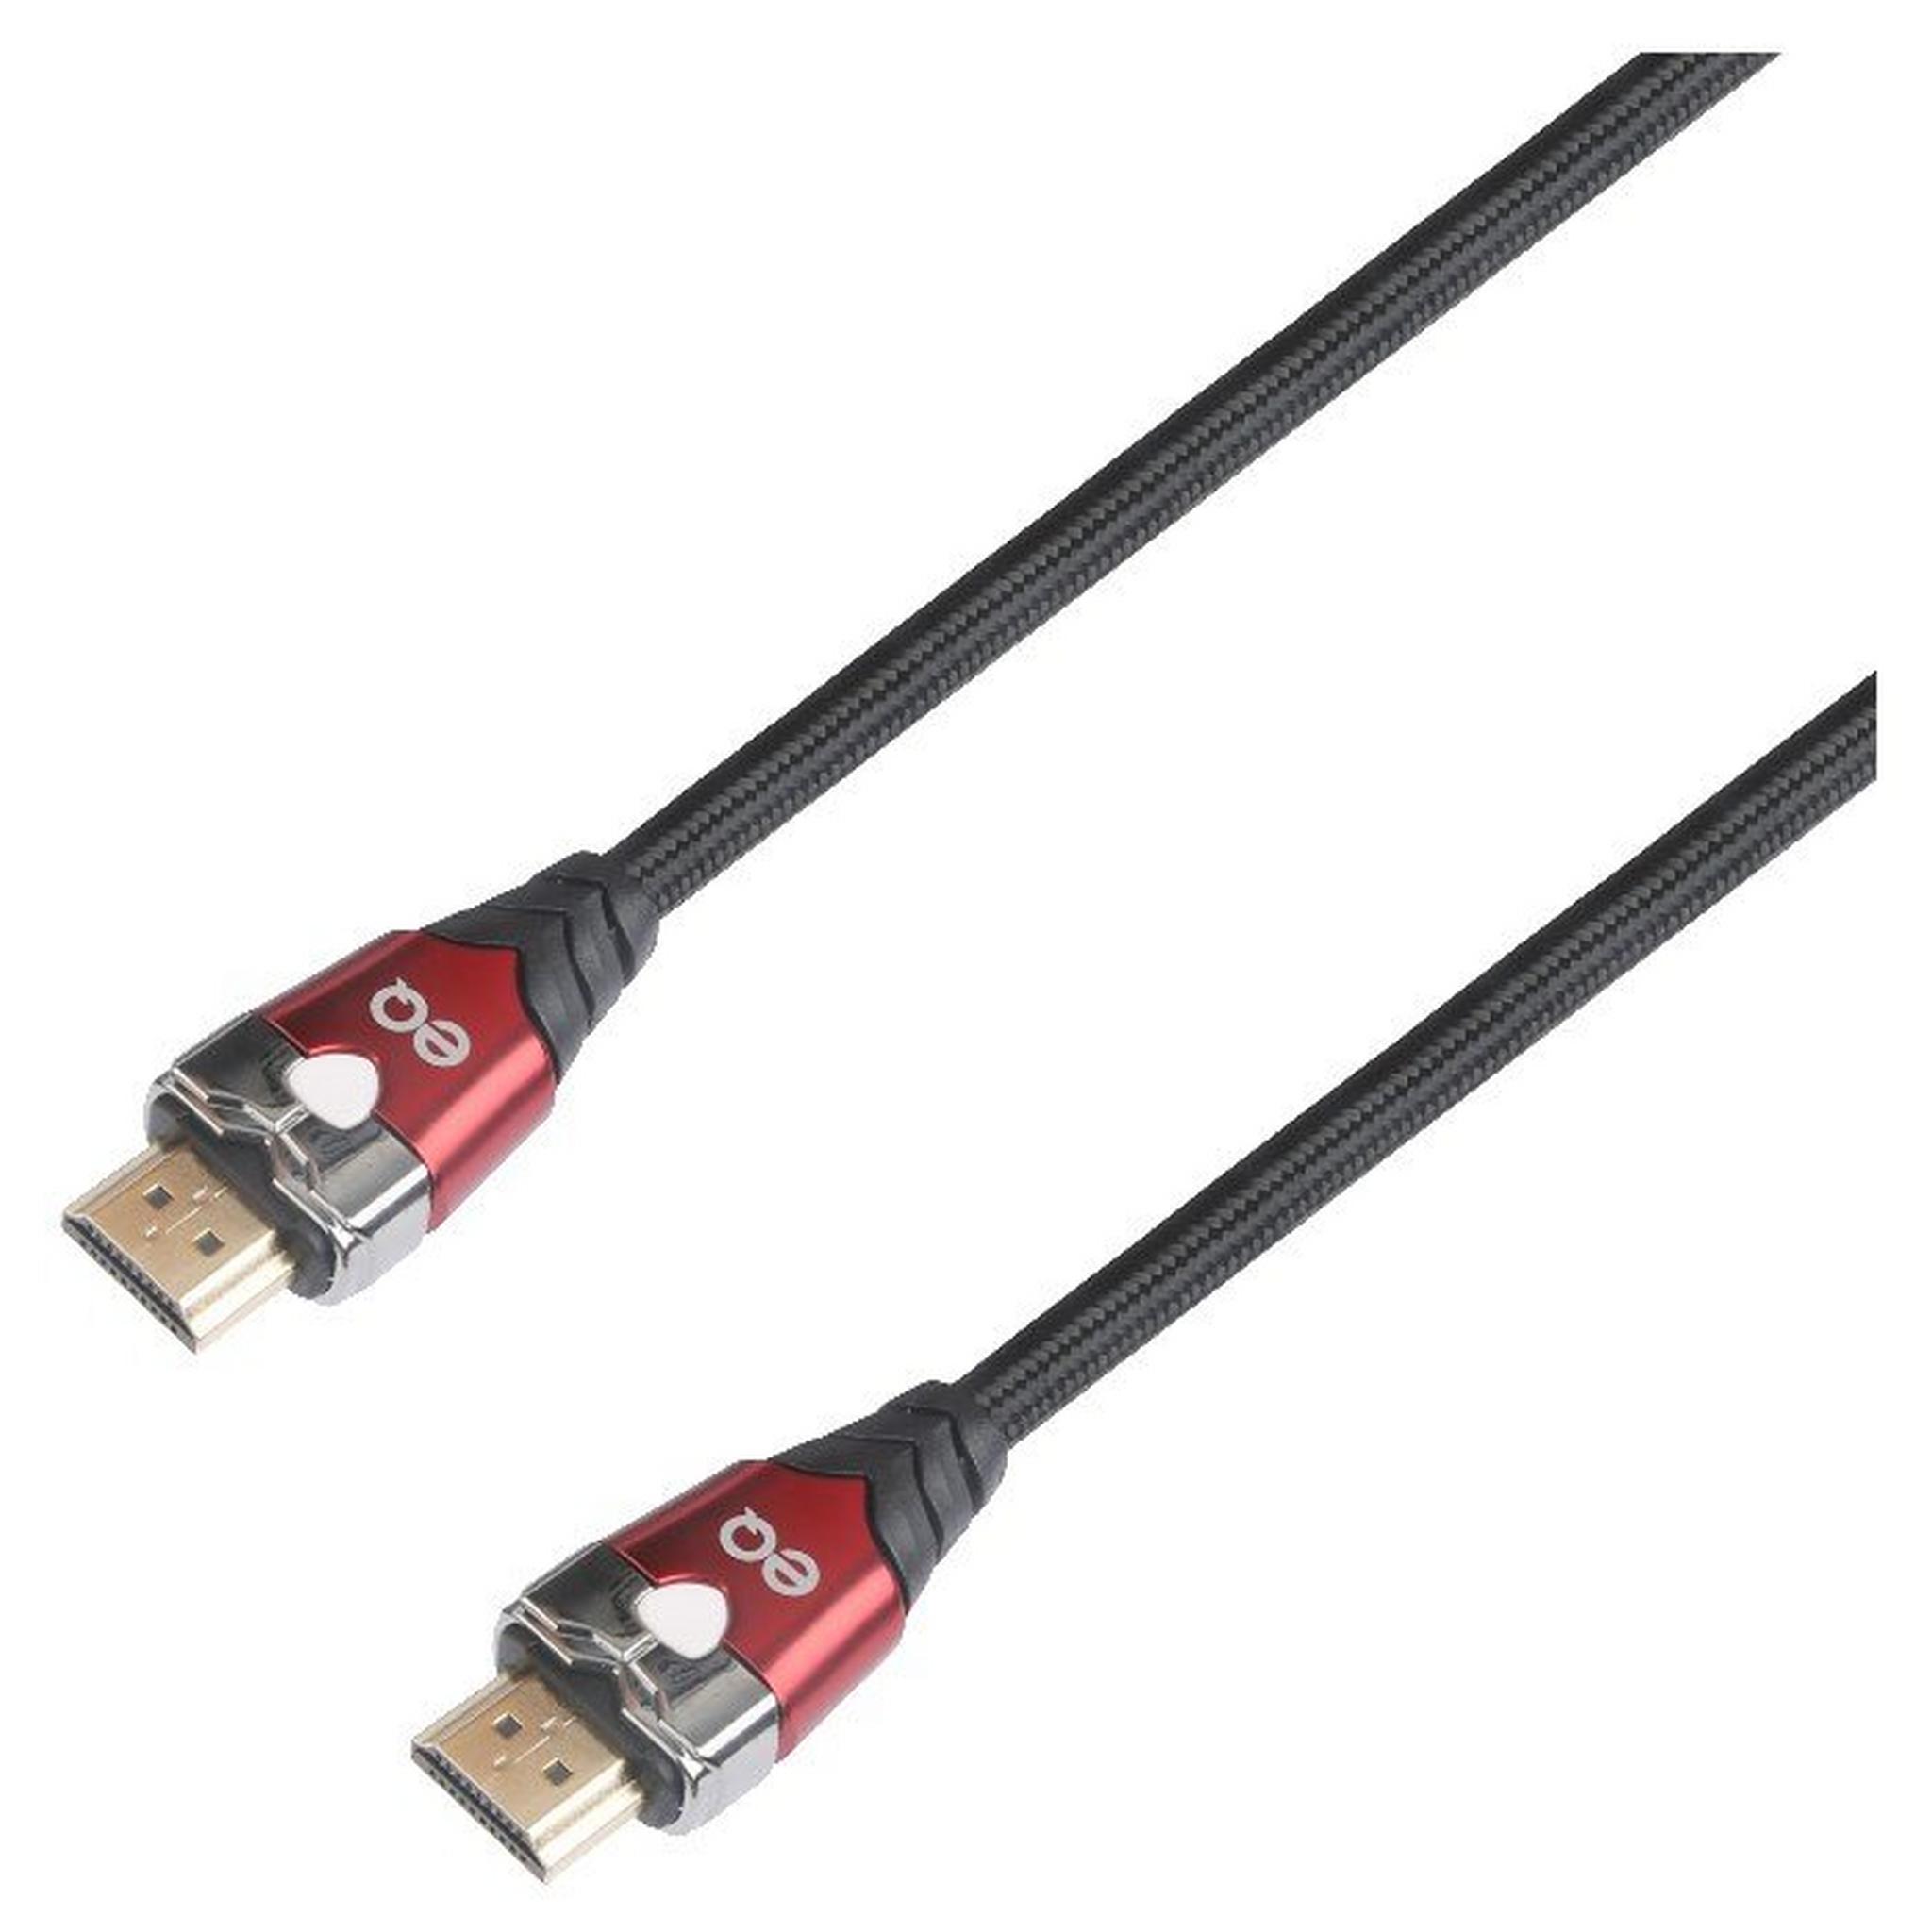 EQ 8K Gaming HDMI Cable, 1.8M, Up to 48Gbps, HD-106A - Black